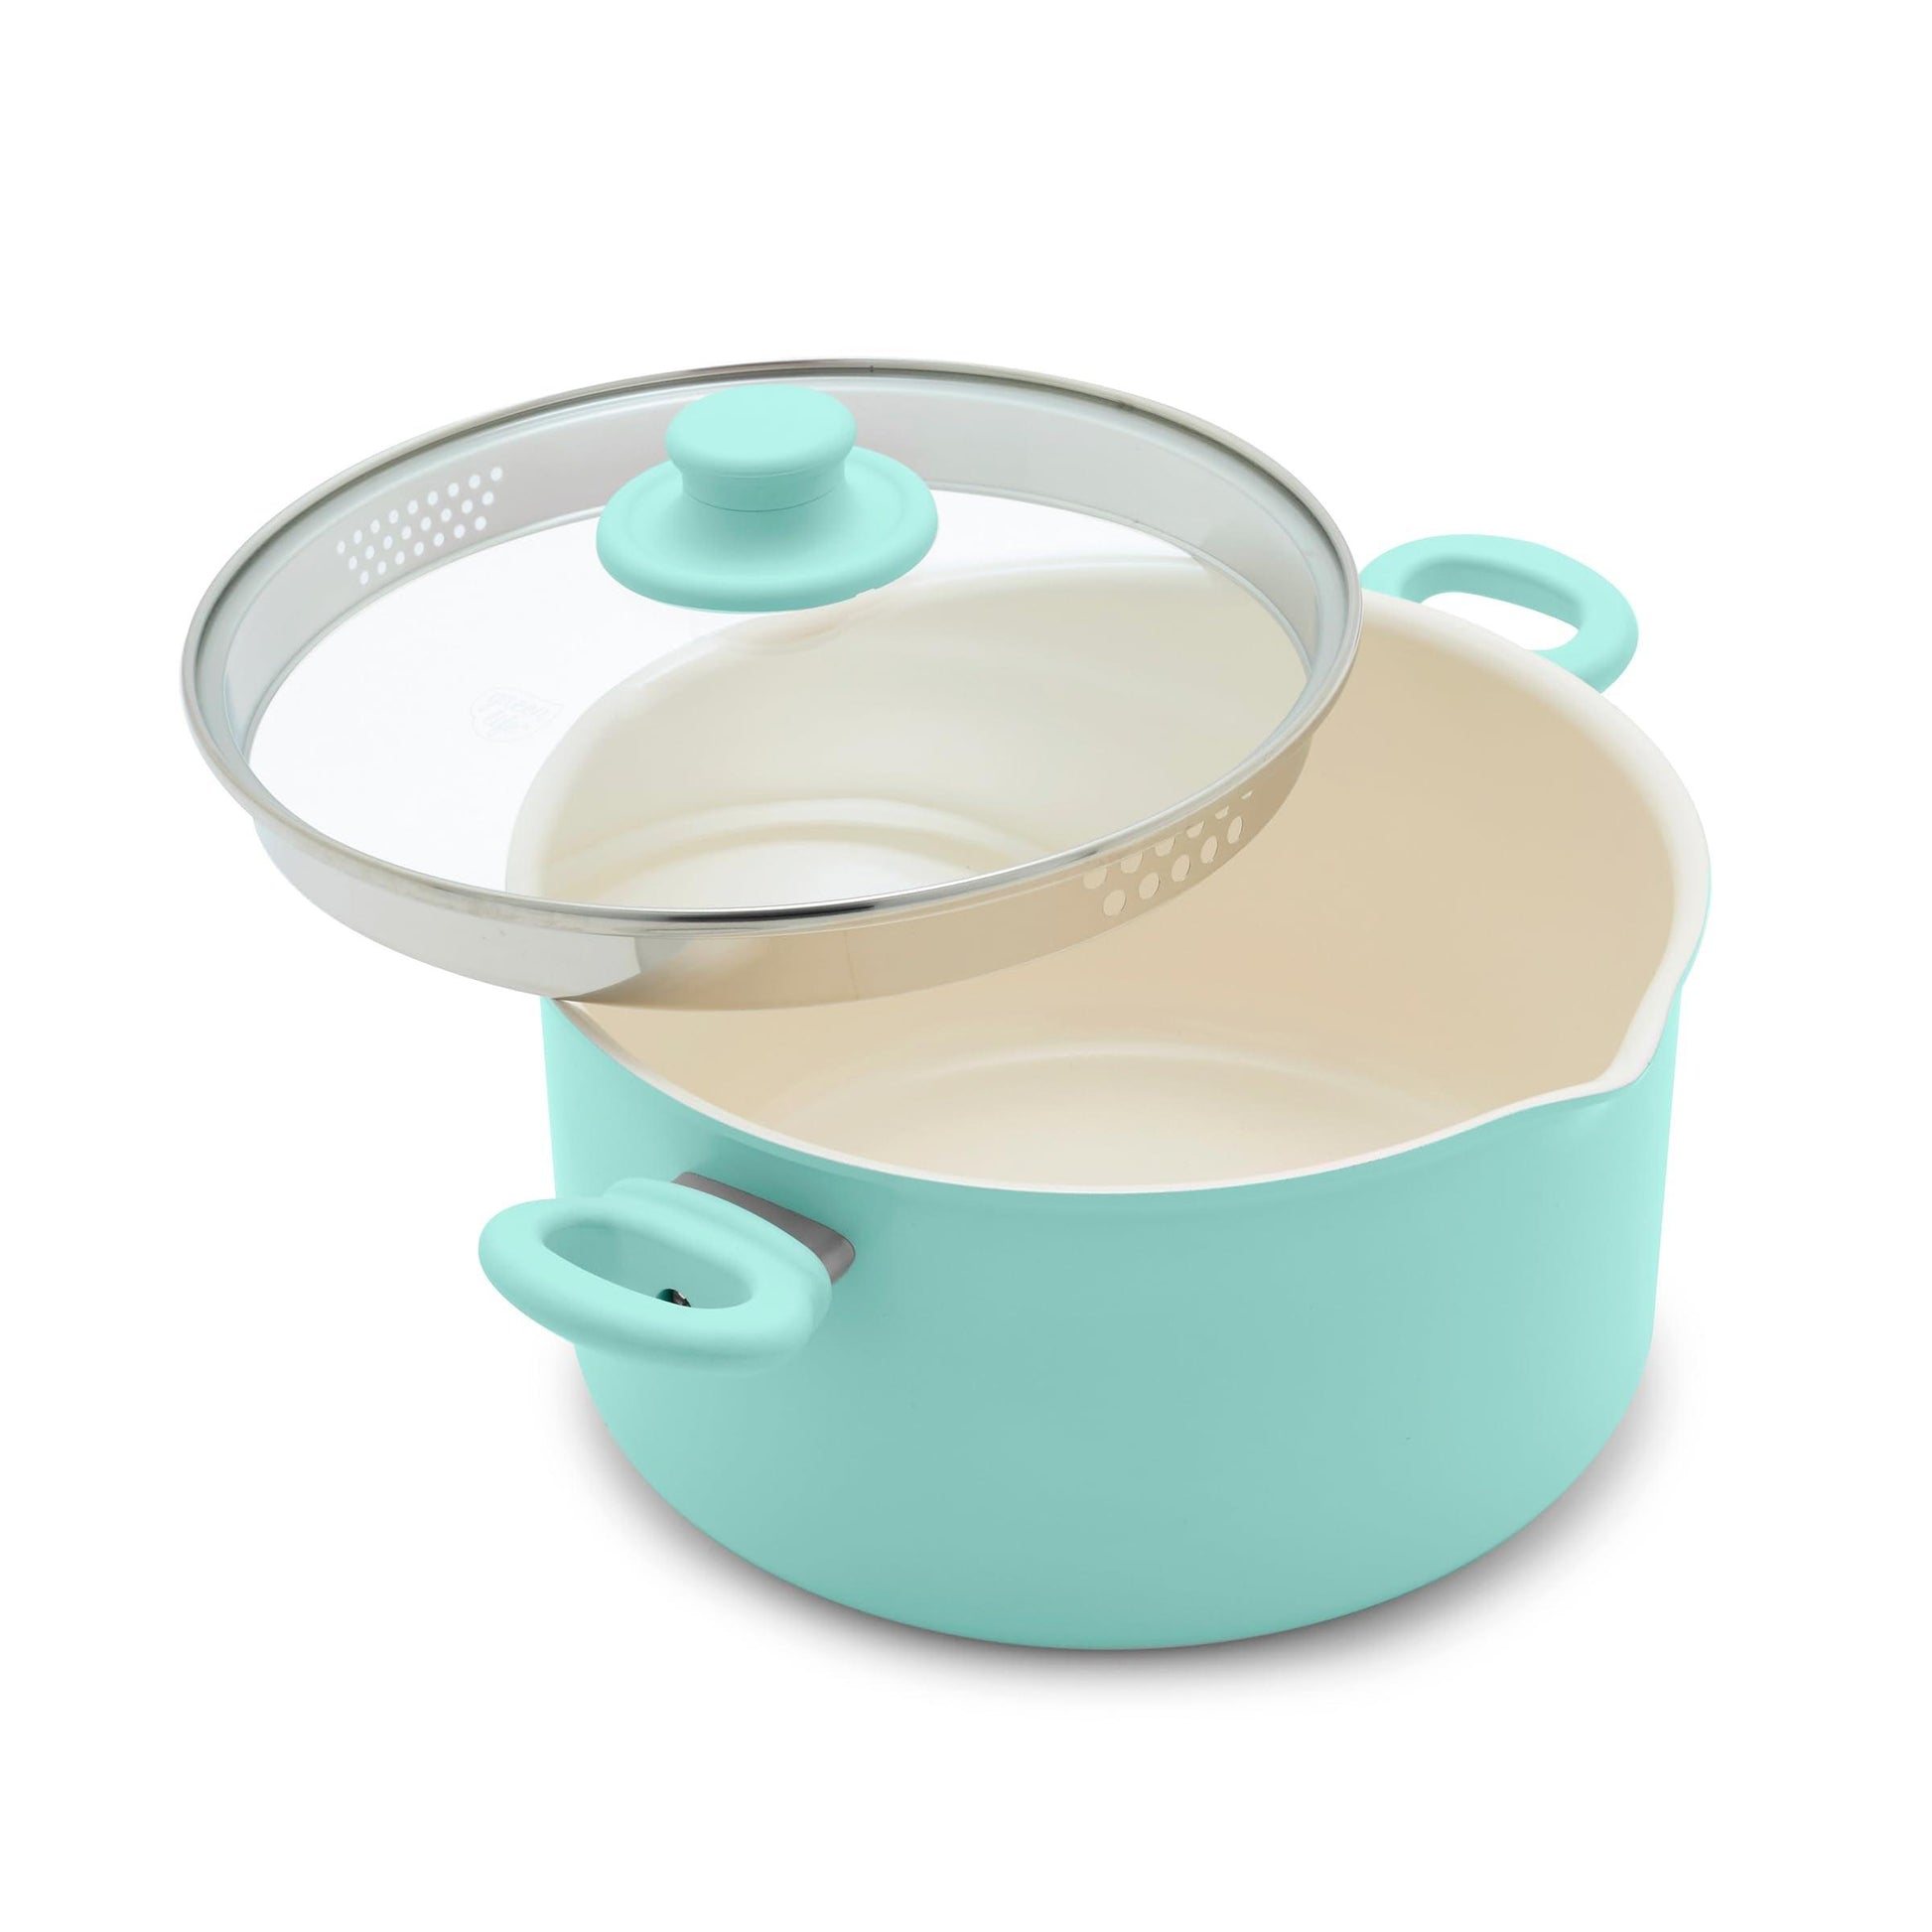 GreenLife SoftGrip Healthy Ceramic Nonstick, 6QT Stockpot with Lid and Straining Lid, PFAS-Free, Dishwasher Safe, Turquoise - CookCave